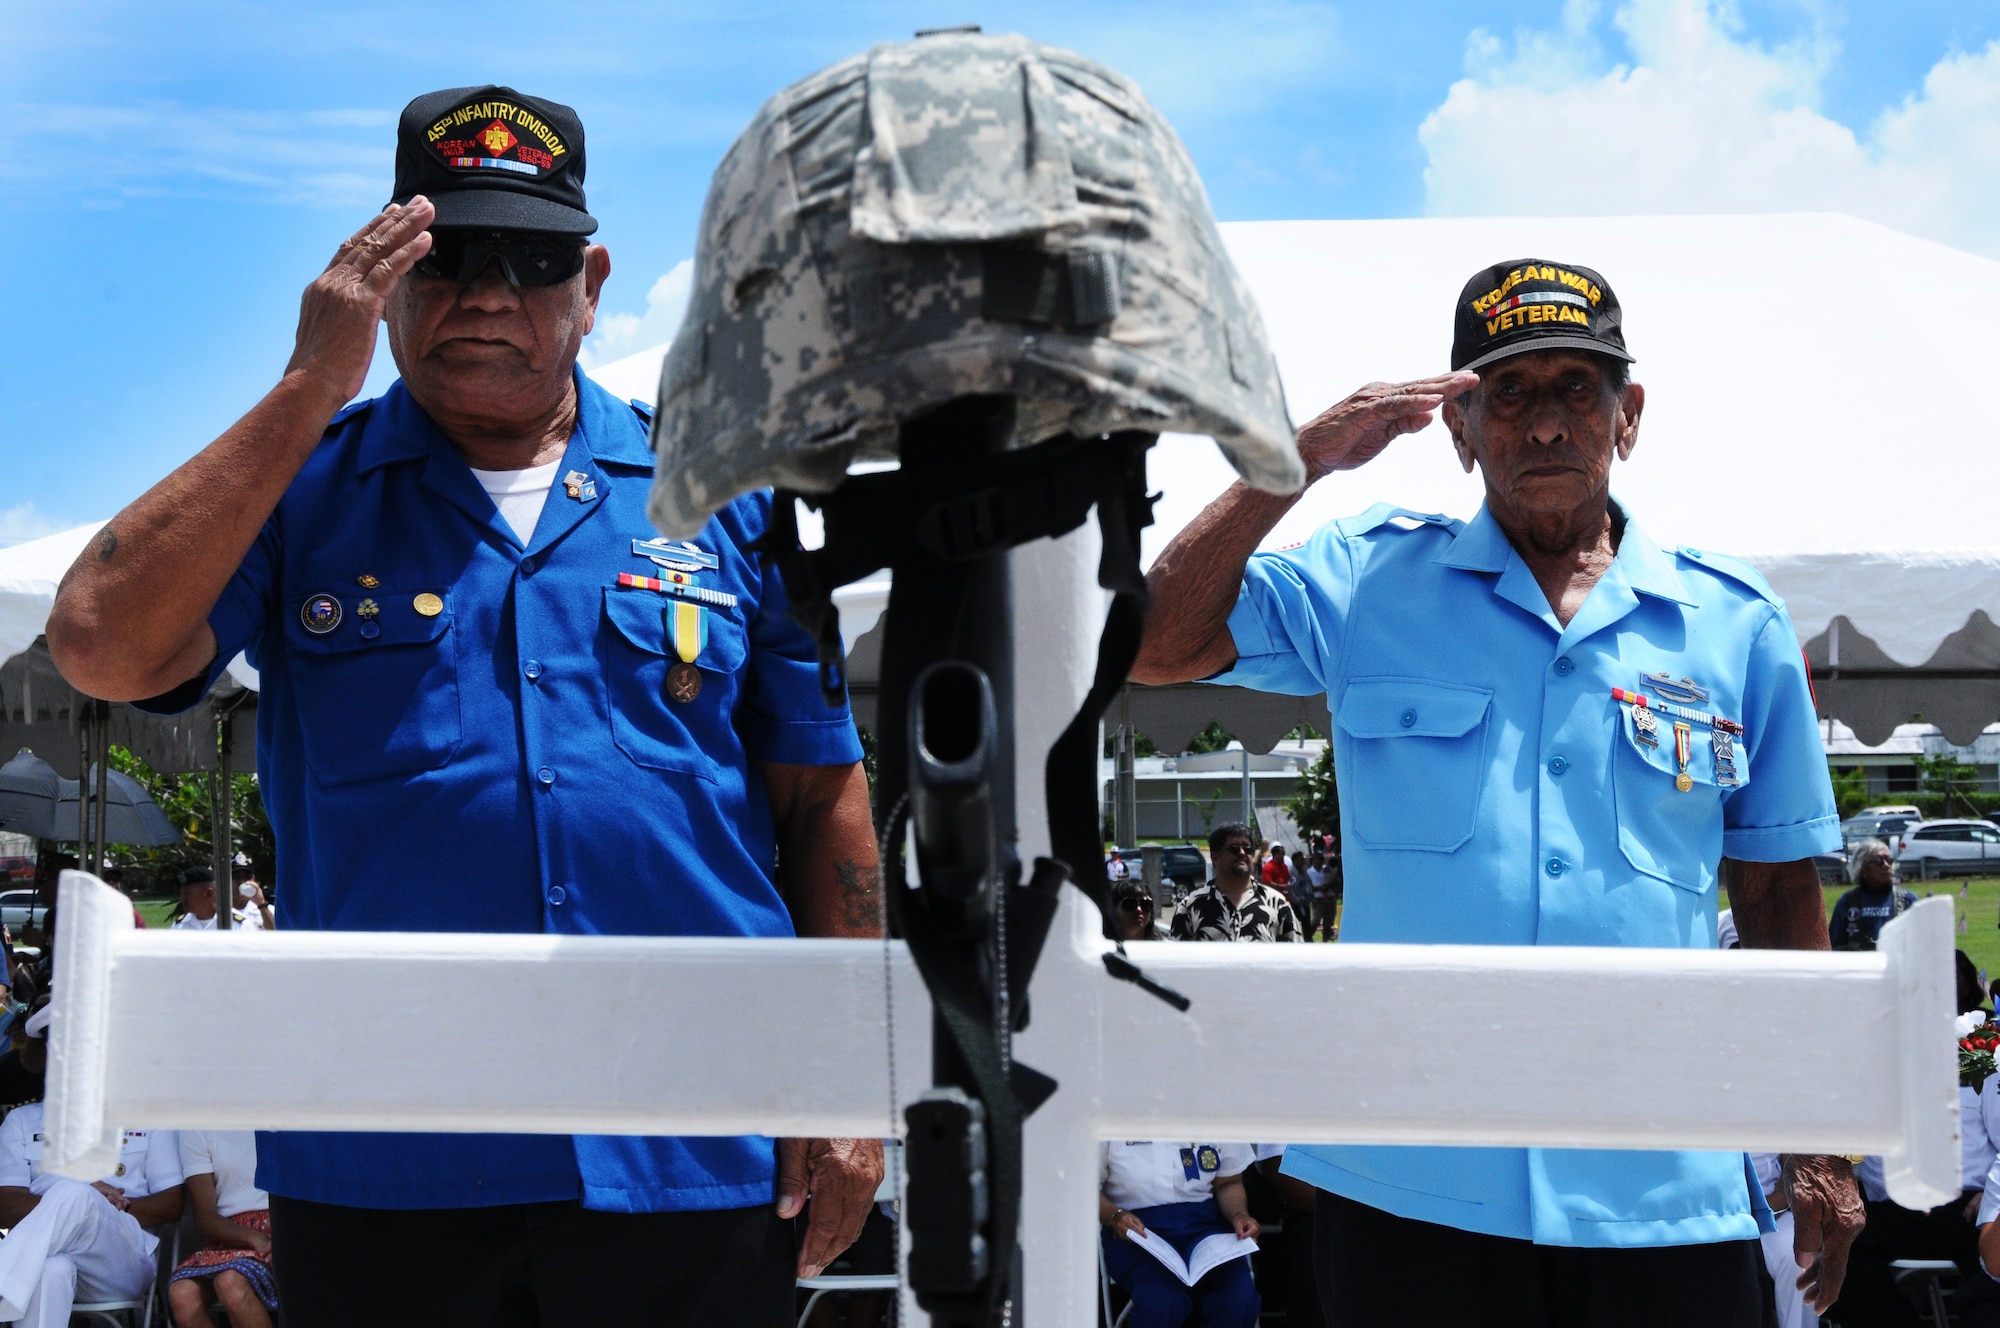 ANDERSEN AIR FORCE BASE, Guam- Tony Calvo and William Quenga of the Korean War Veterans Association present a salute to the cross honoring Korean War veterans during the Guam Veteran Cemetery Memorial May 28. The crosses honored seven wars of the American history ranging from World War I to the war in Iraq. (U.S. Air Force photo by Senior Airman Carlin Leslie/Released)